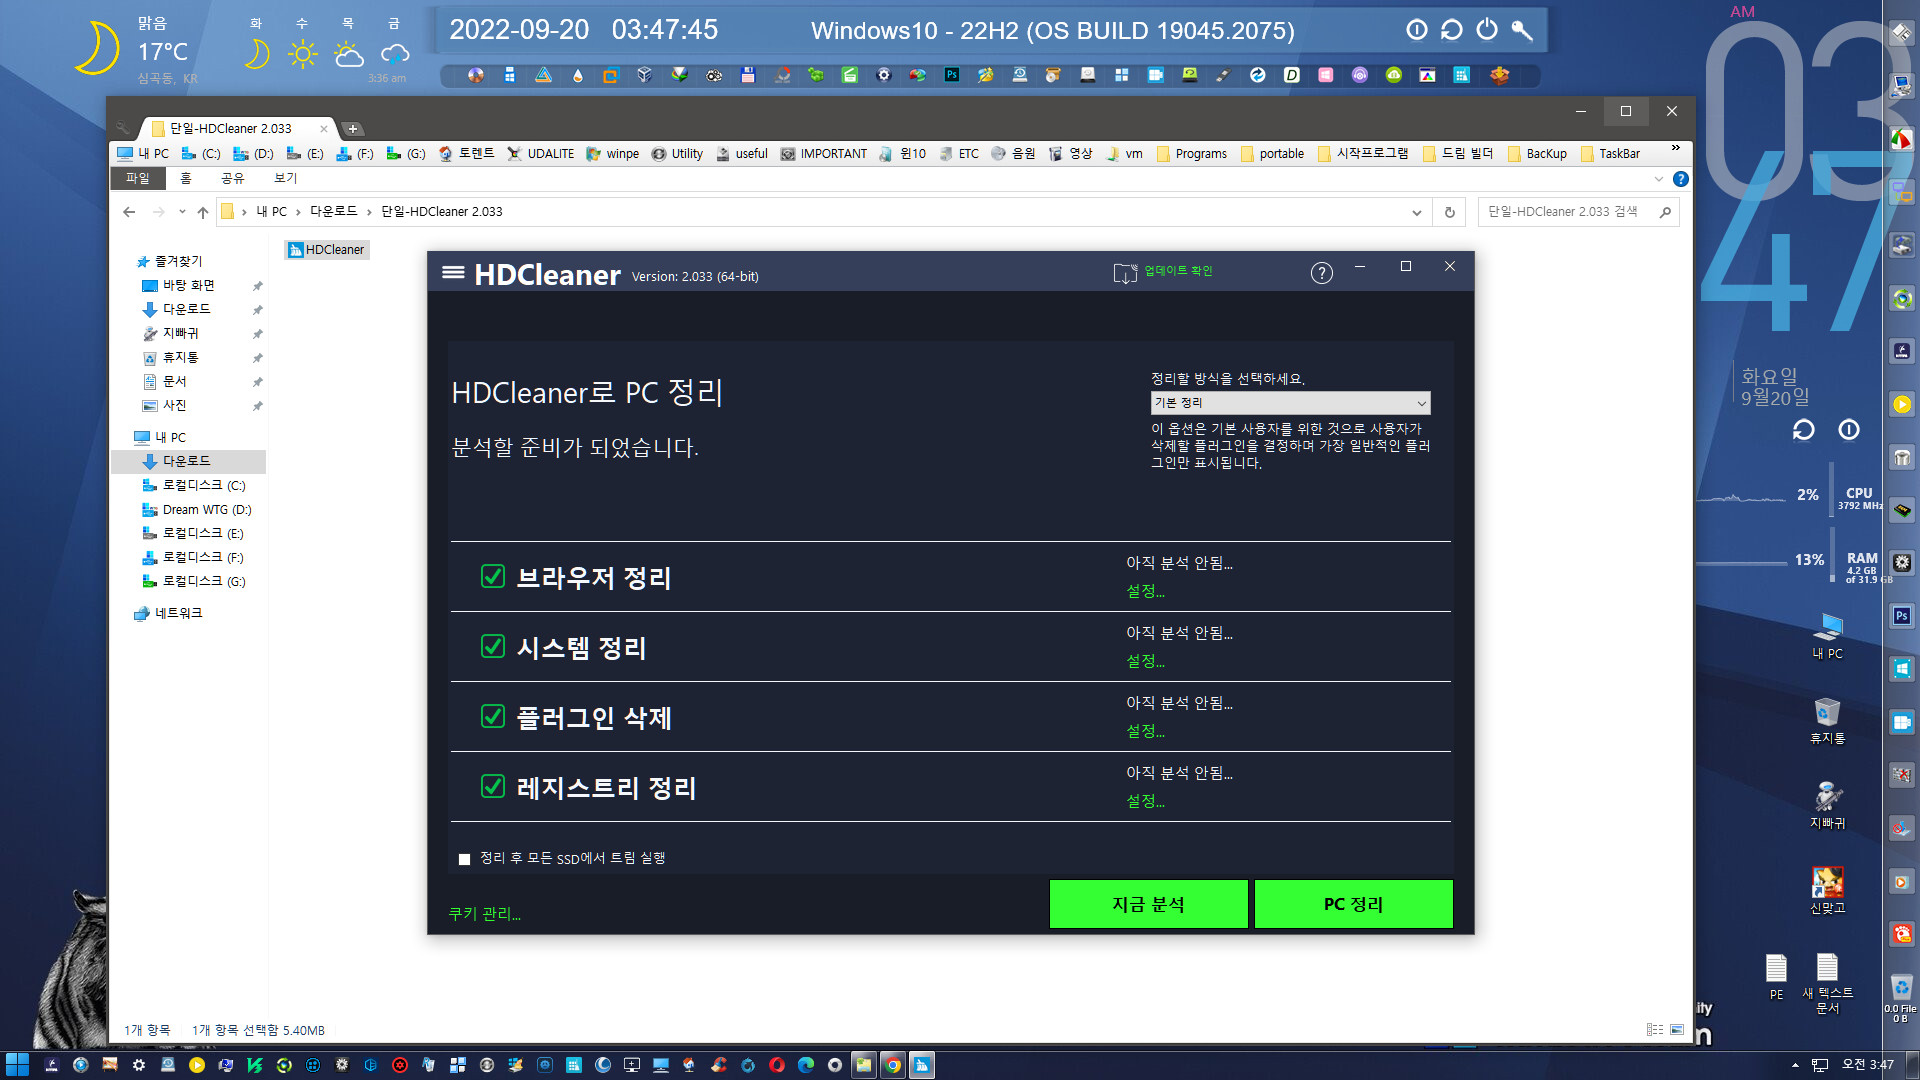 download the last version for android HDCleaner 2.057